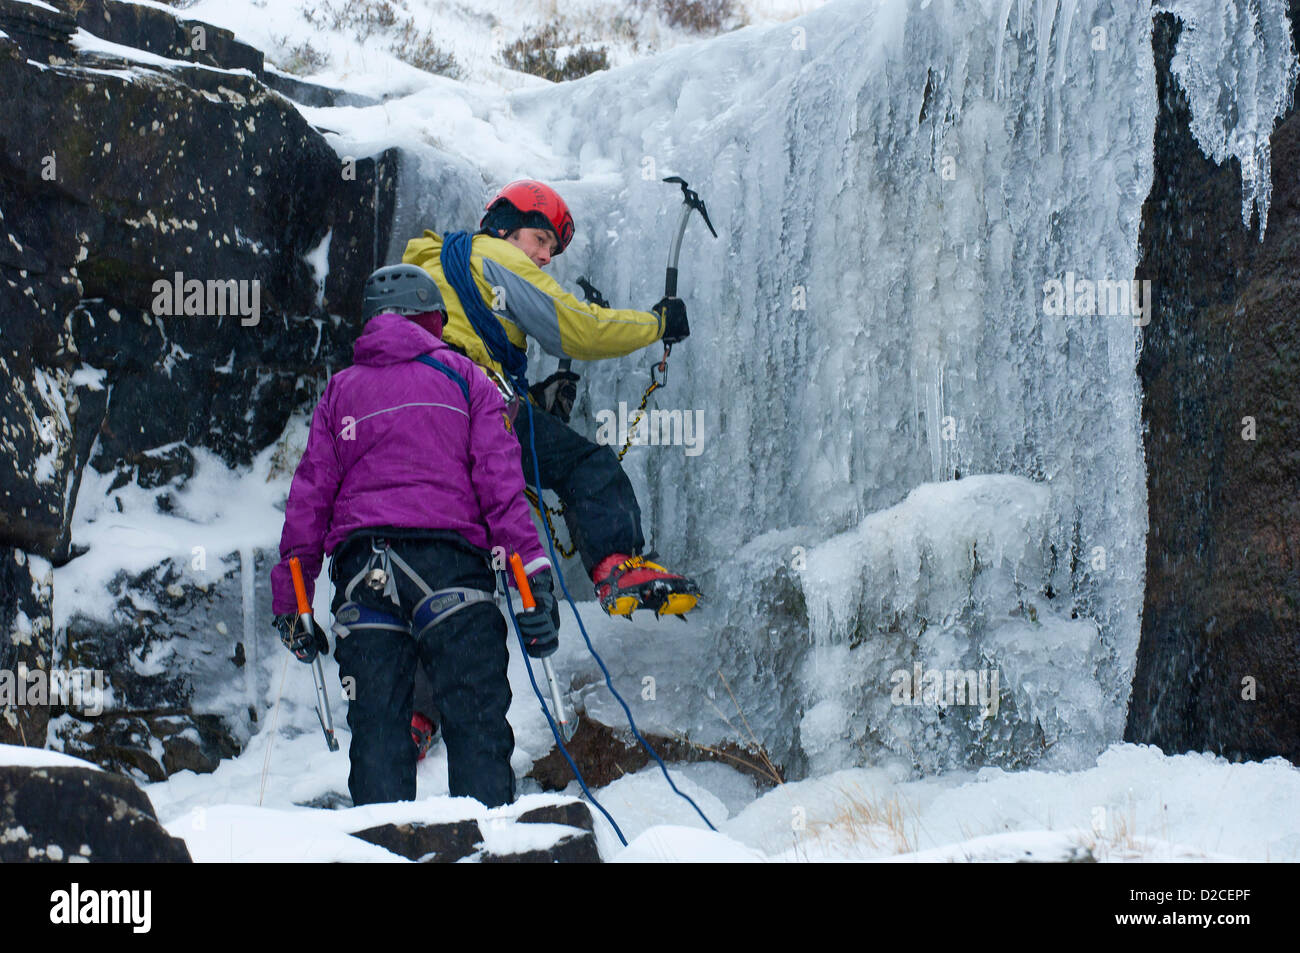 Brecon Beacons, Wales, UK. 20th January, 2013. Acouple of  ice climbers from Brecon, UK.  tackle a cascade near Storey Arms. Photo credit: Graham M. Lawrence/Alamy Live News. Stock Photo